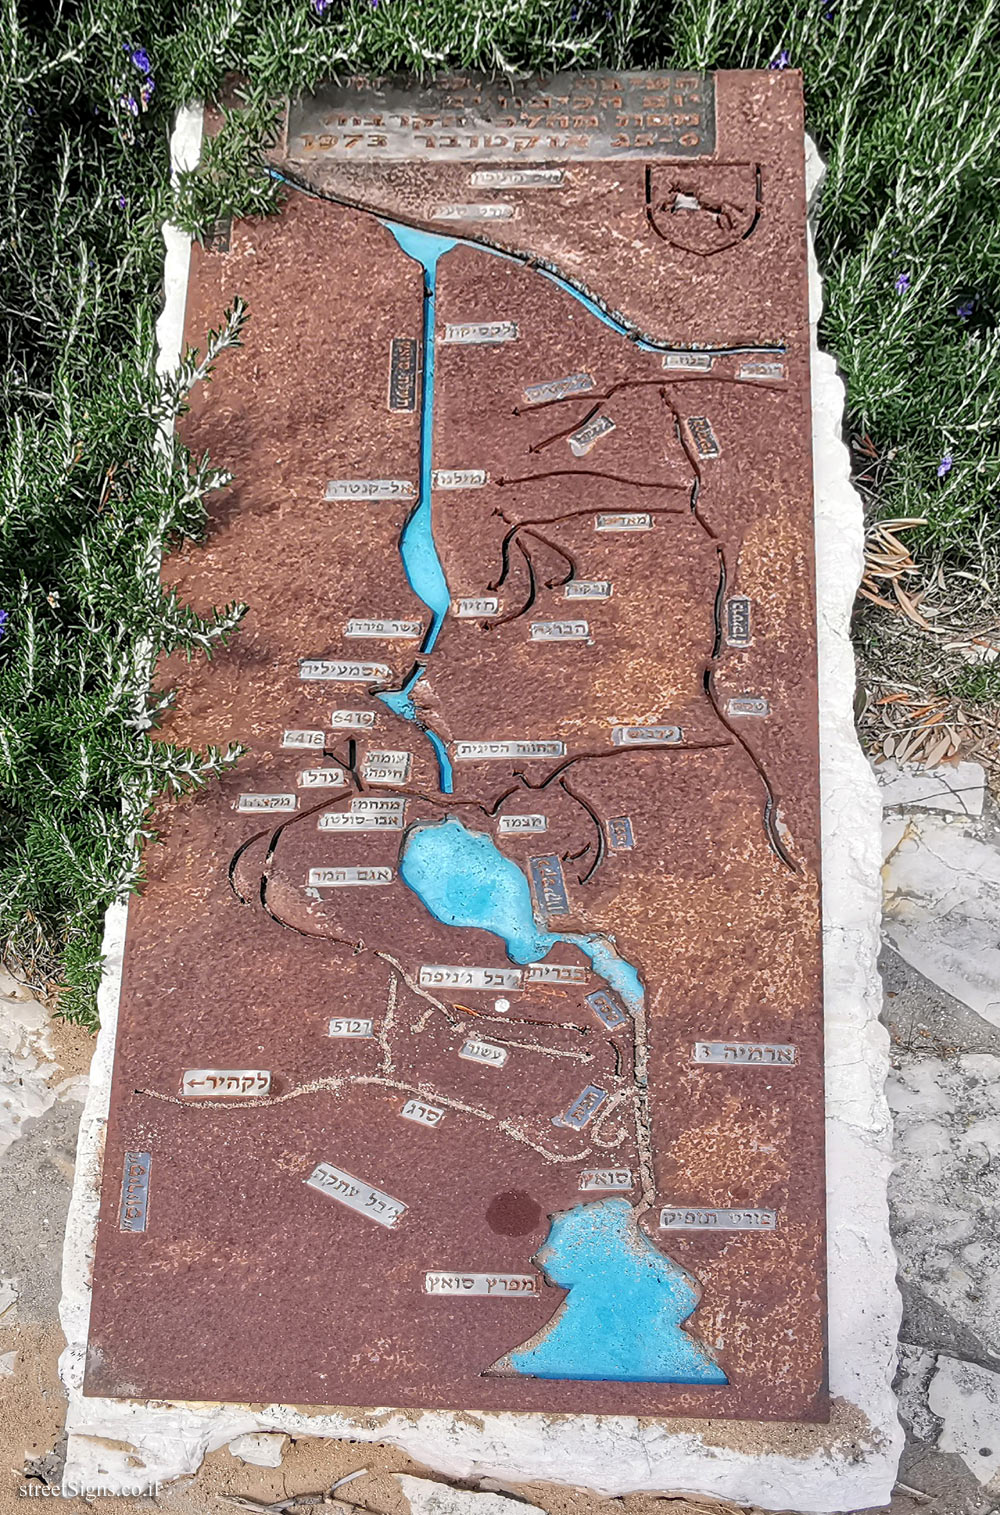 Latrun - Commemoration of the 217th Brigade - Map of the battles in the Yom Kippur War